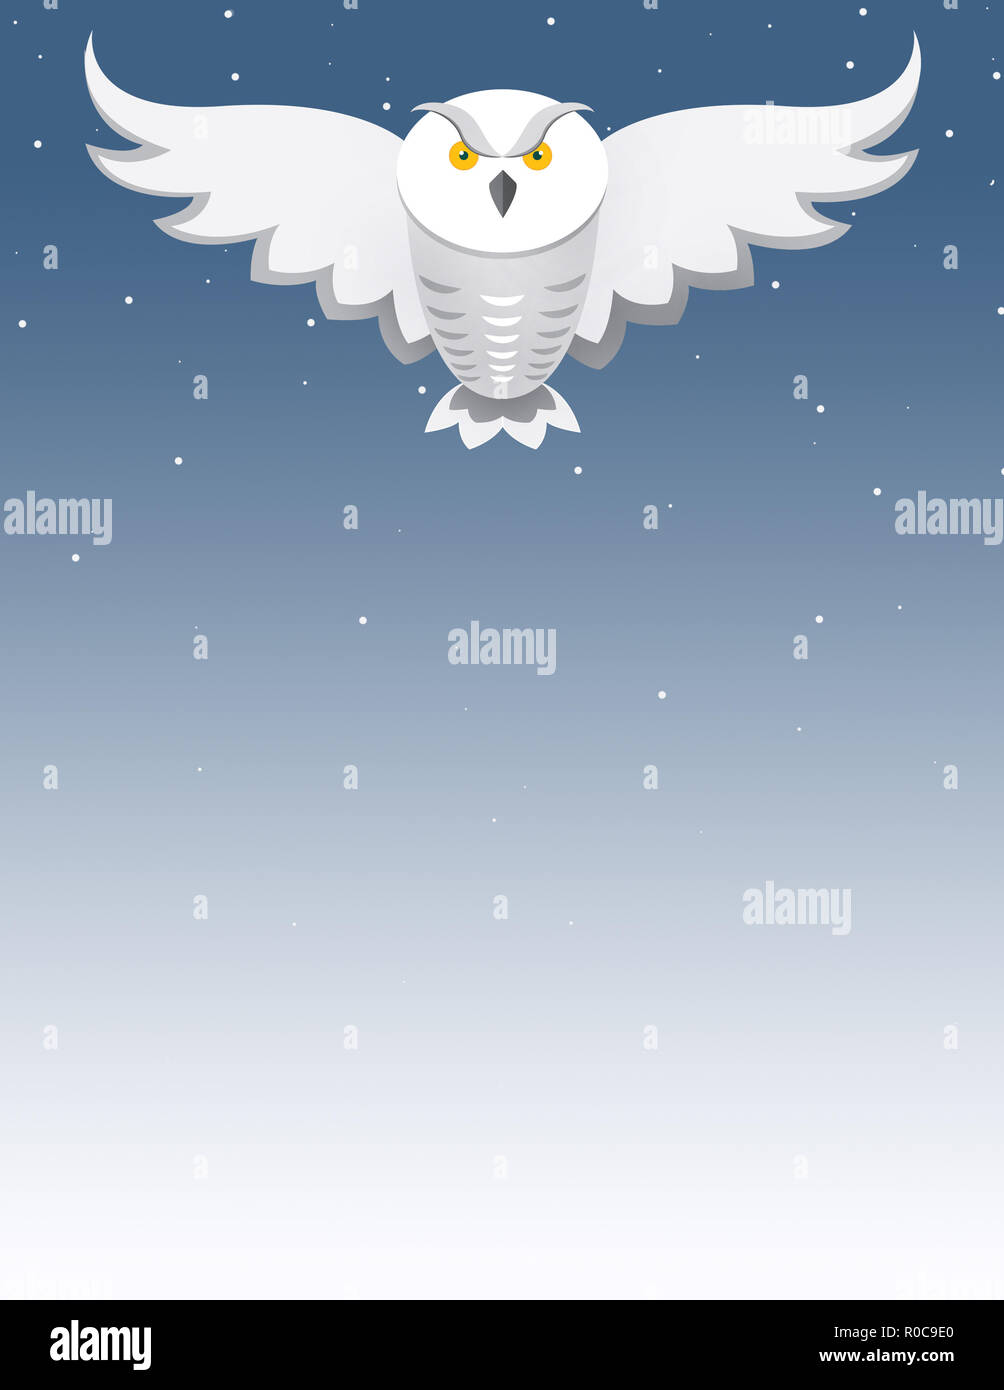 Illustration of a snow white owl flying against a night sky Stock Photo